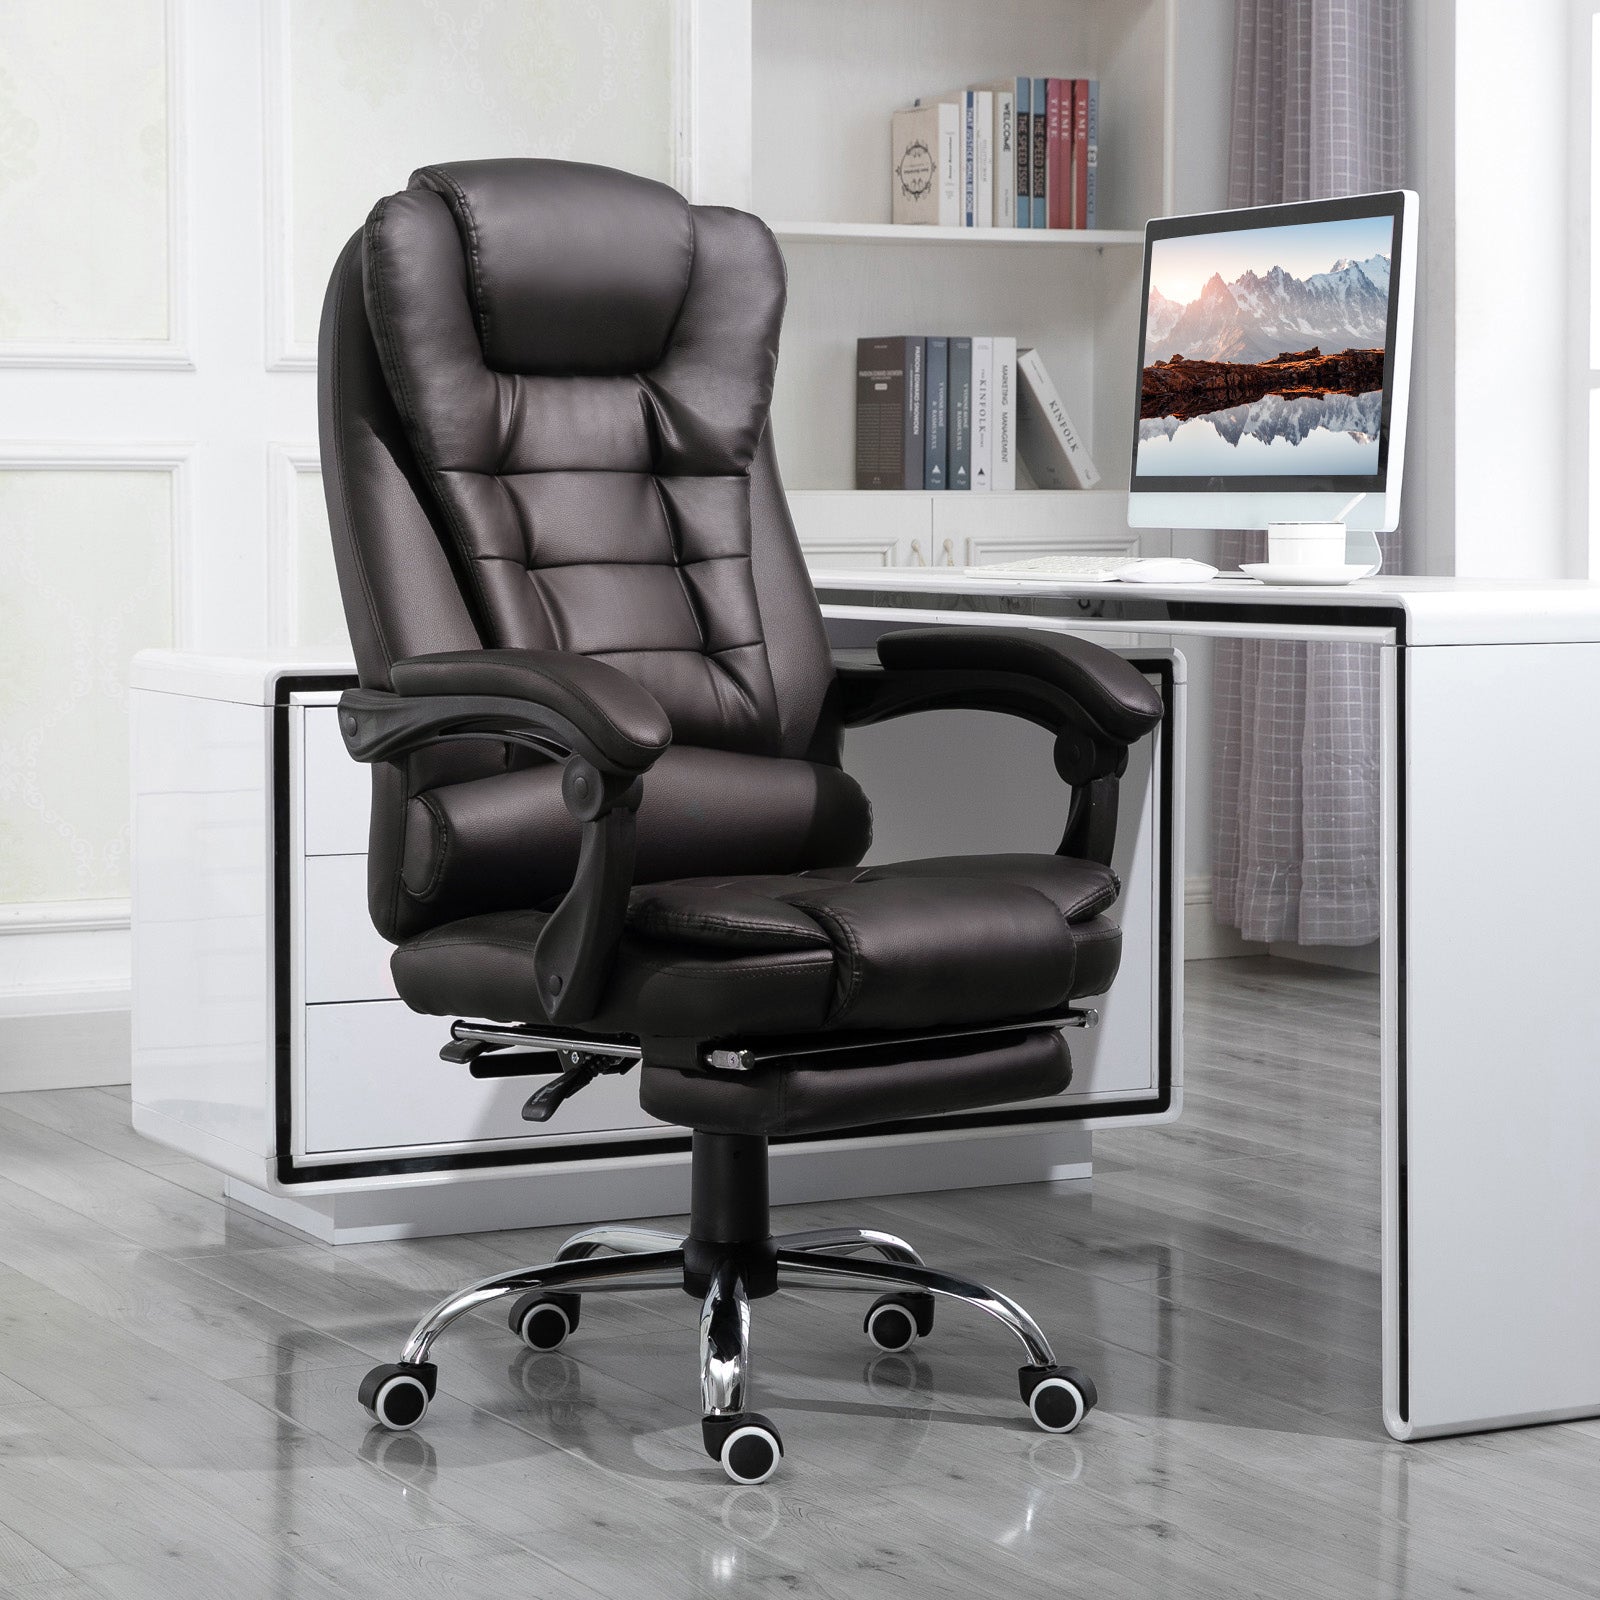 PU Leather Executive Office Chair, High Back Swivel Chair with Retractable Footrest, Adjustable Height, Reclining Function, Brown-1